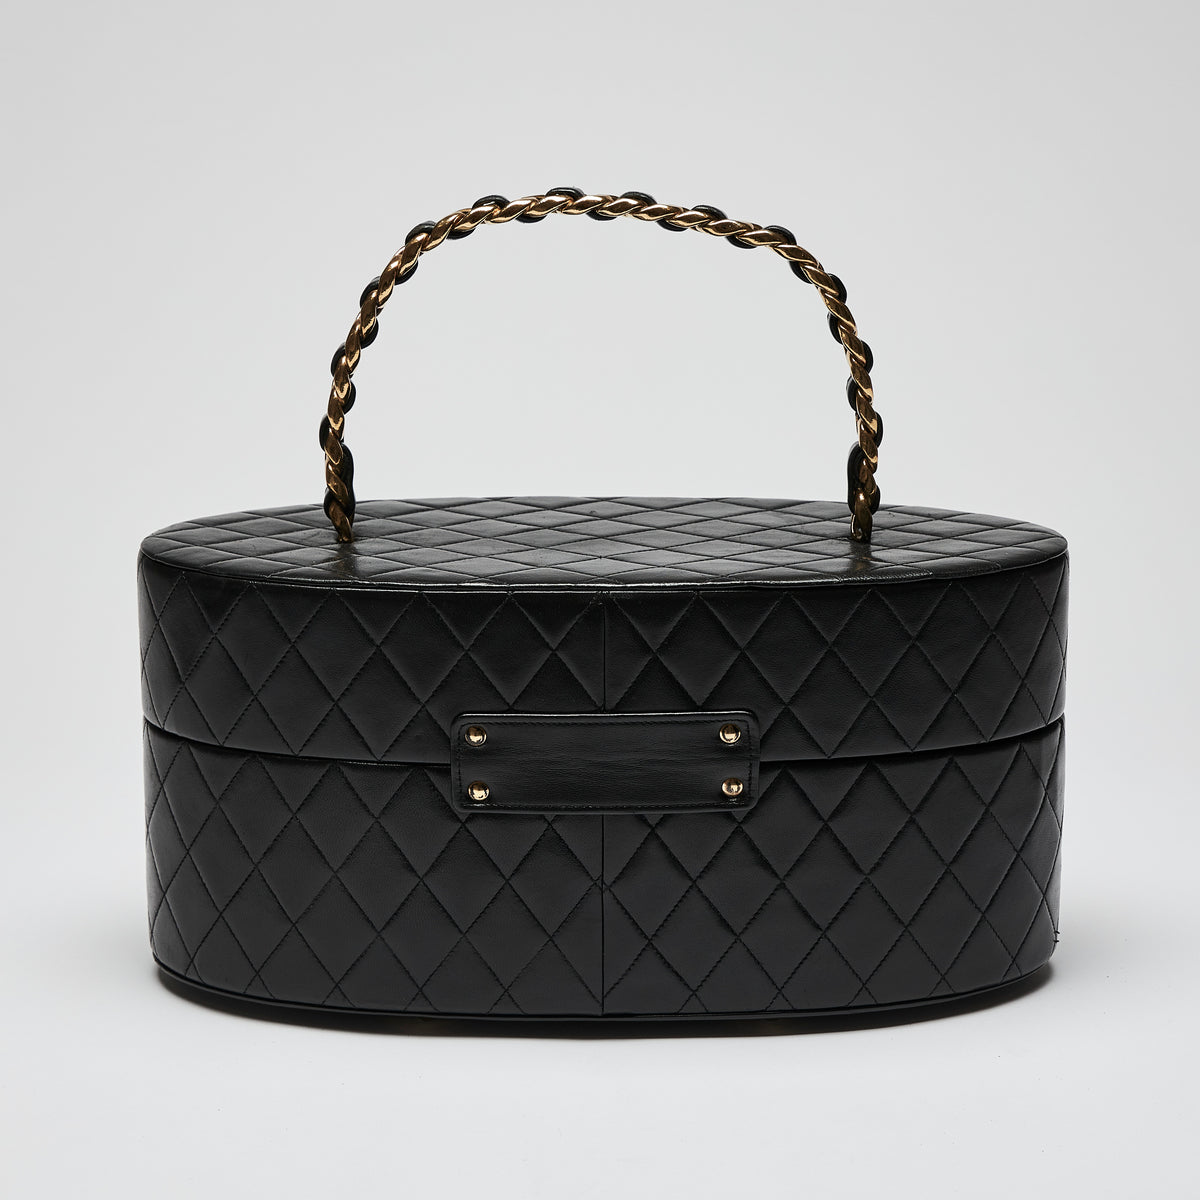 Pre-Loved Black Quilted Leather Oval Top Handle Vanity Case.(back)